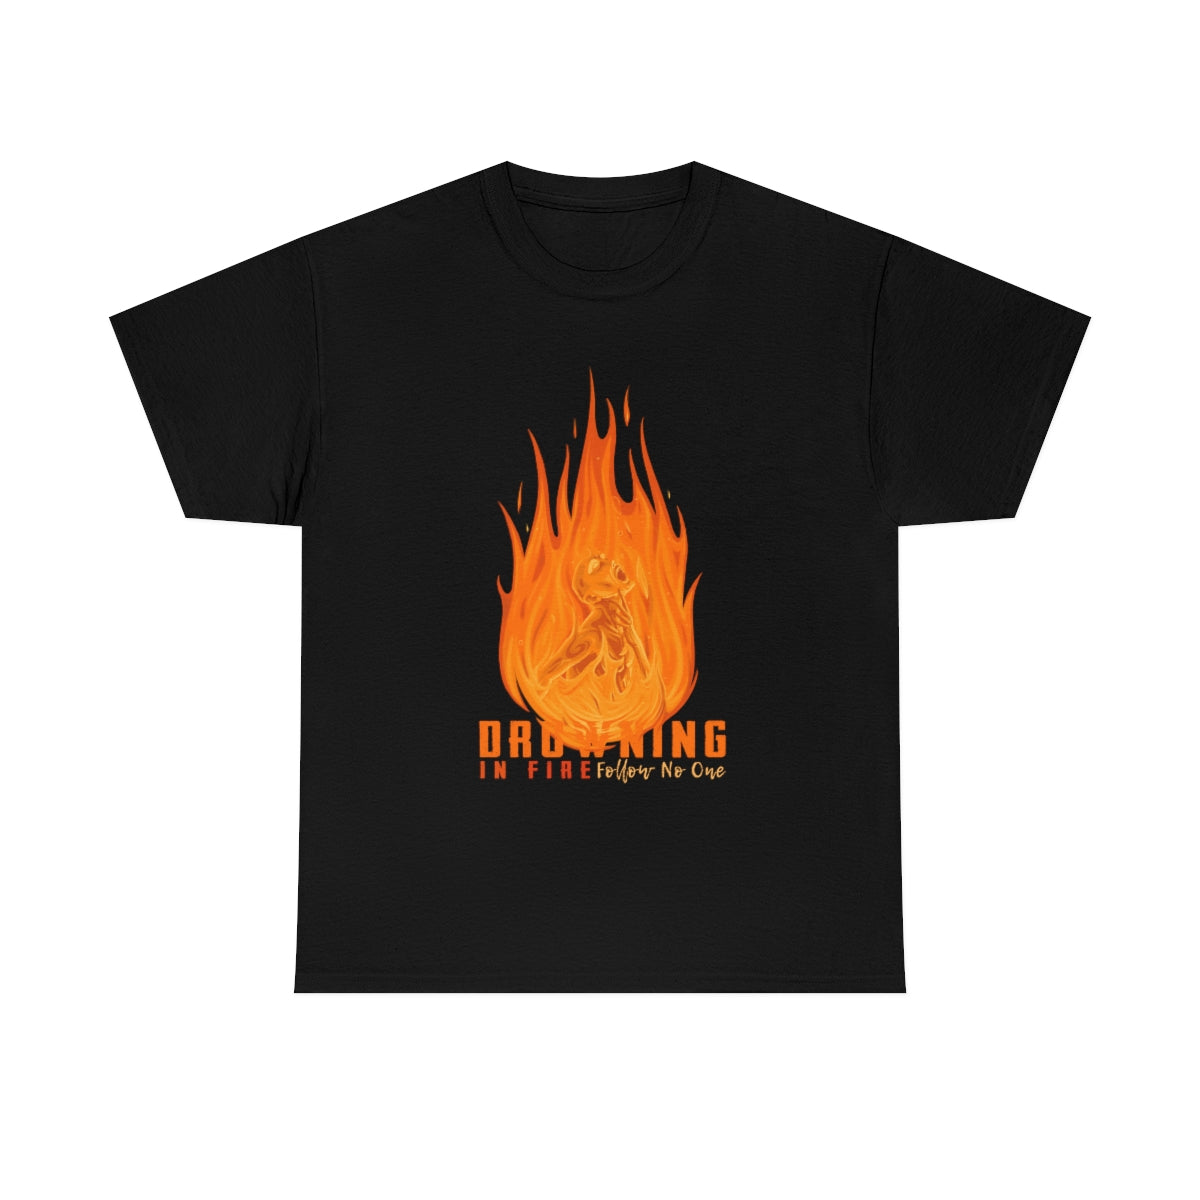 Drowning in Fire T-Shirt - From Fate the Album!